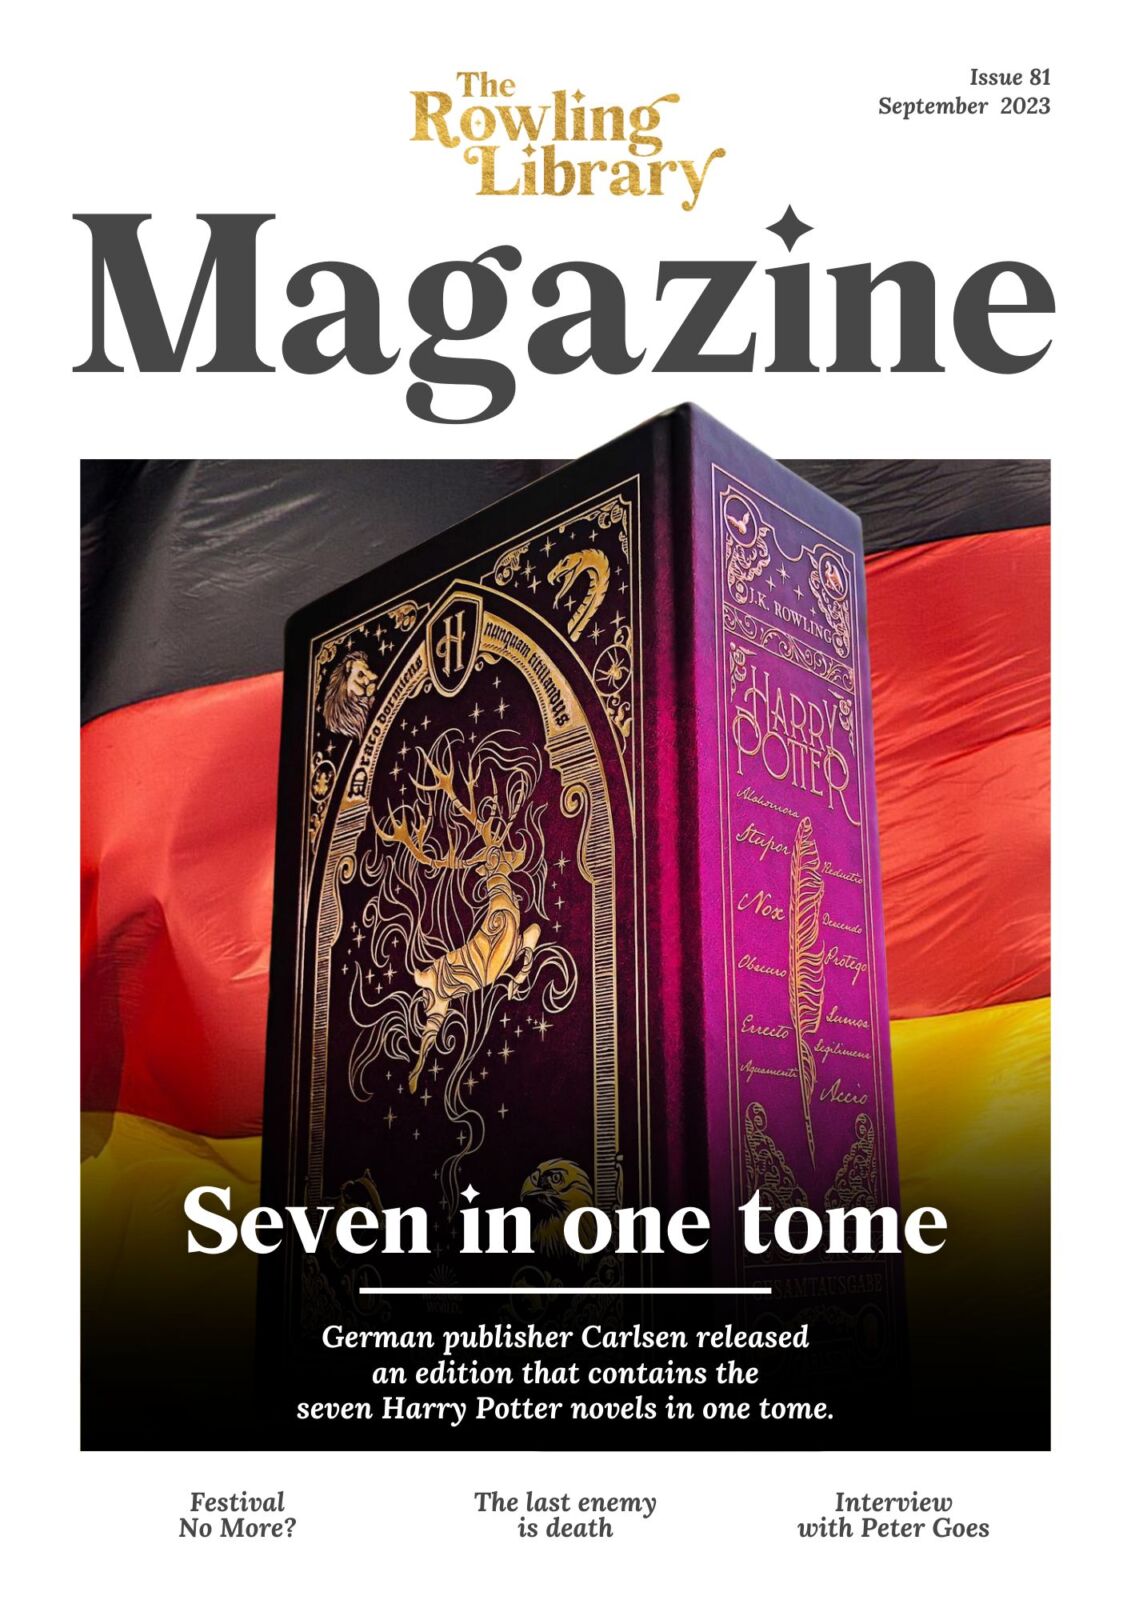 The Rowling Library Magazine #81 (September 2023): Seven in one tome